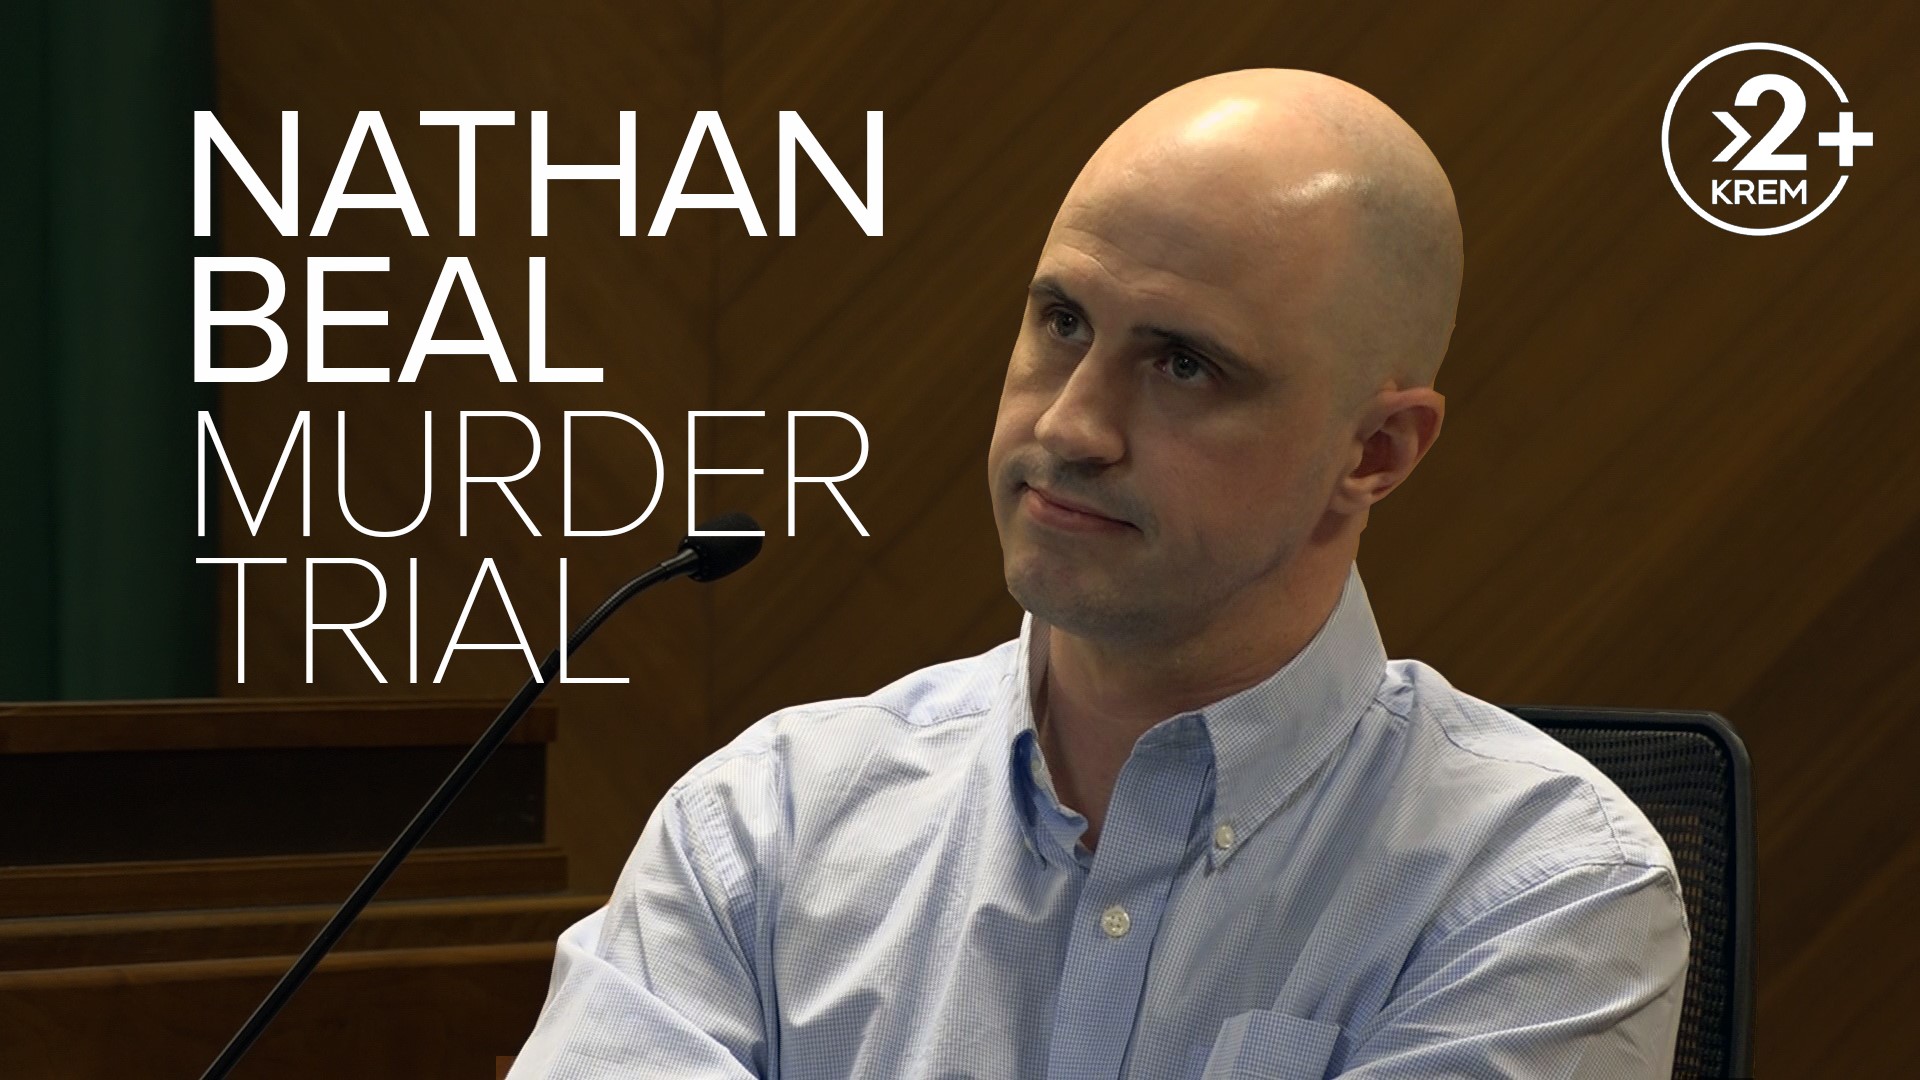 KREM 2's Amanda Roley takes you through the second murder trial for Nathan Beal, accused of killing Andrew Bull in Spokane for practice before murdering his ex-wife.